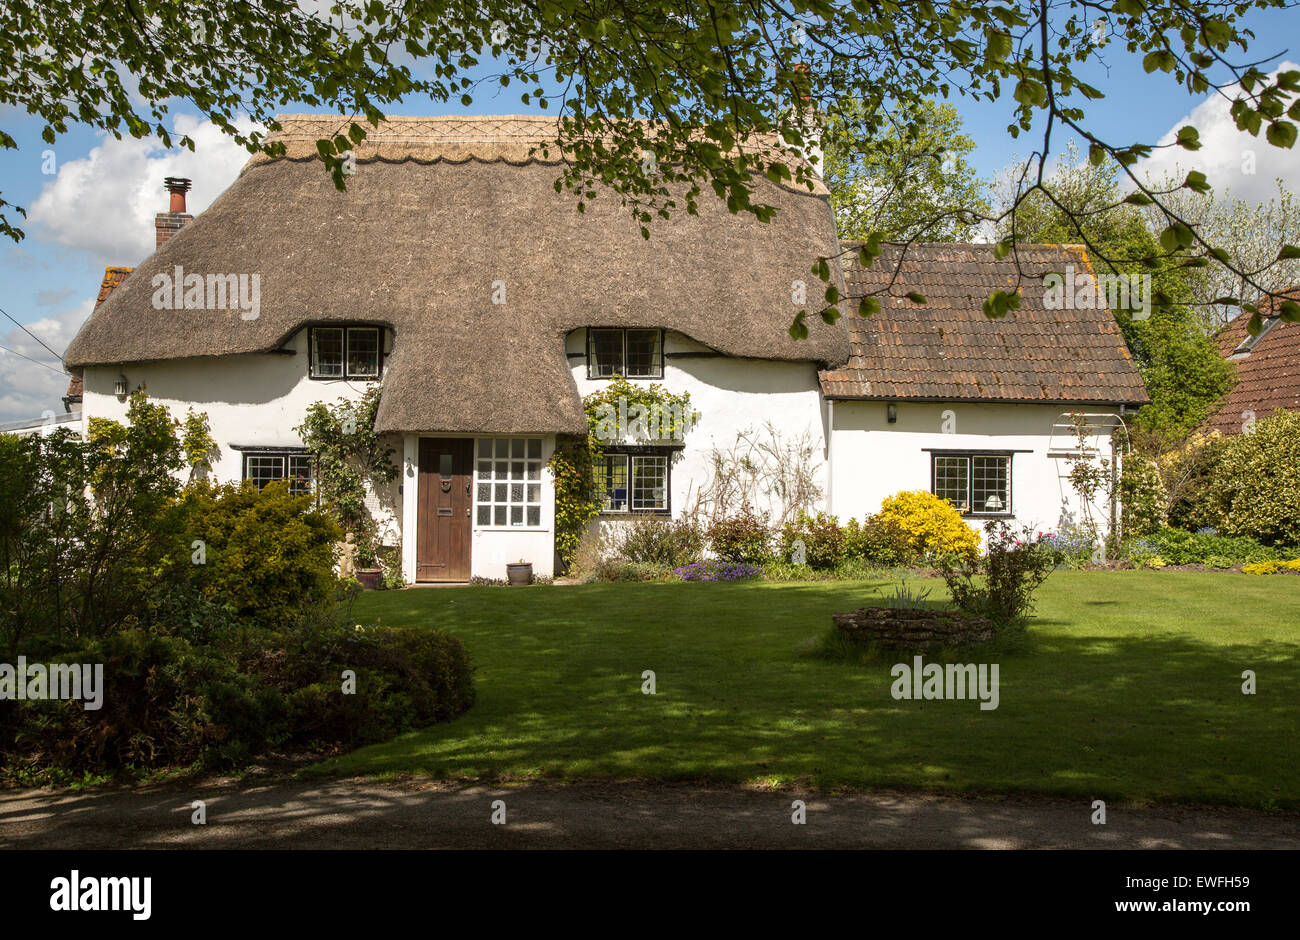 Thatched attractive country cottage, Cherhill, Wiltshire, England, UK Stock Photo